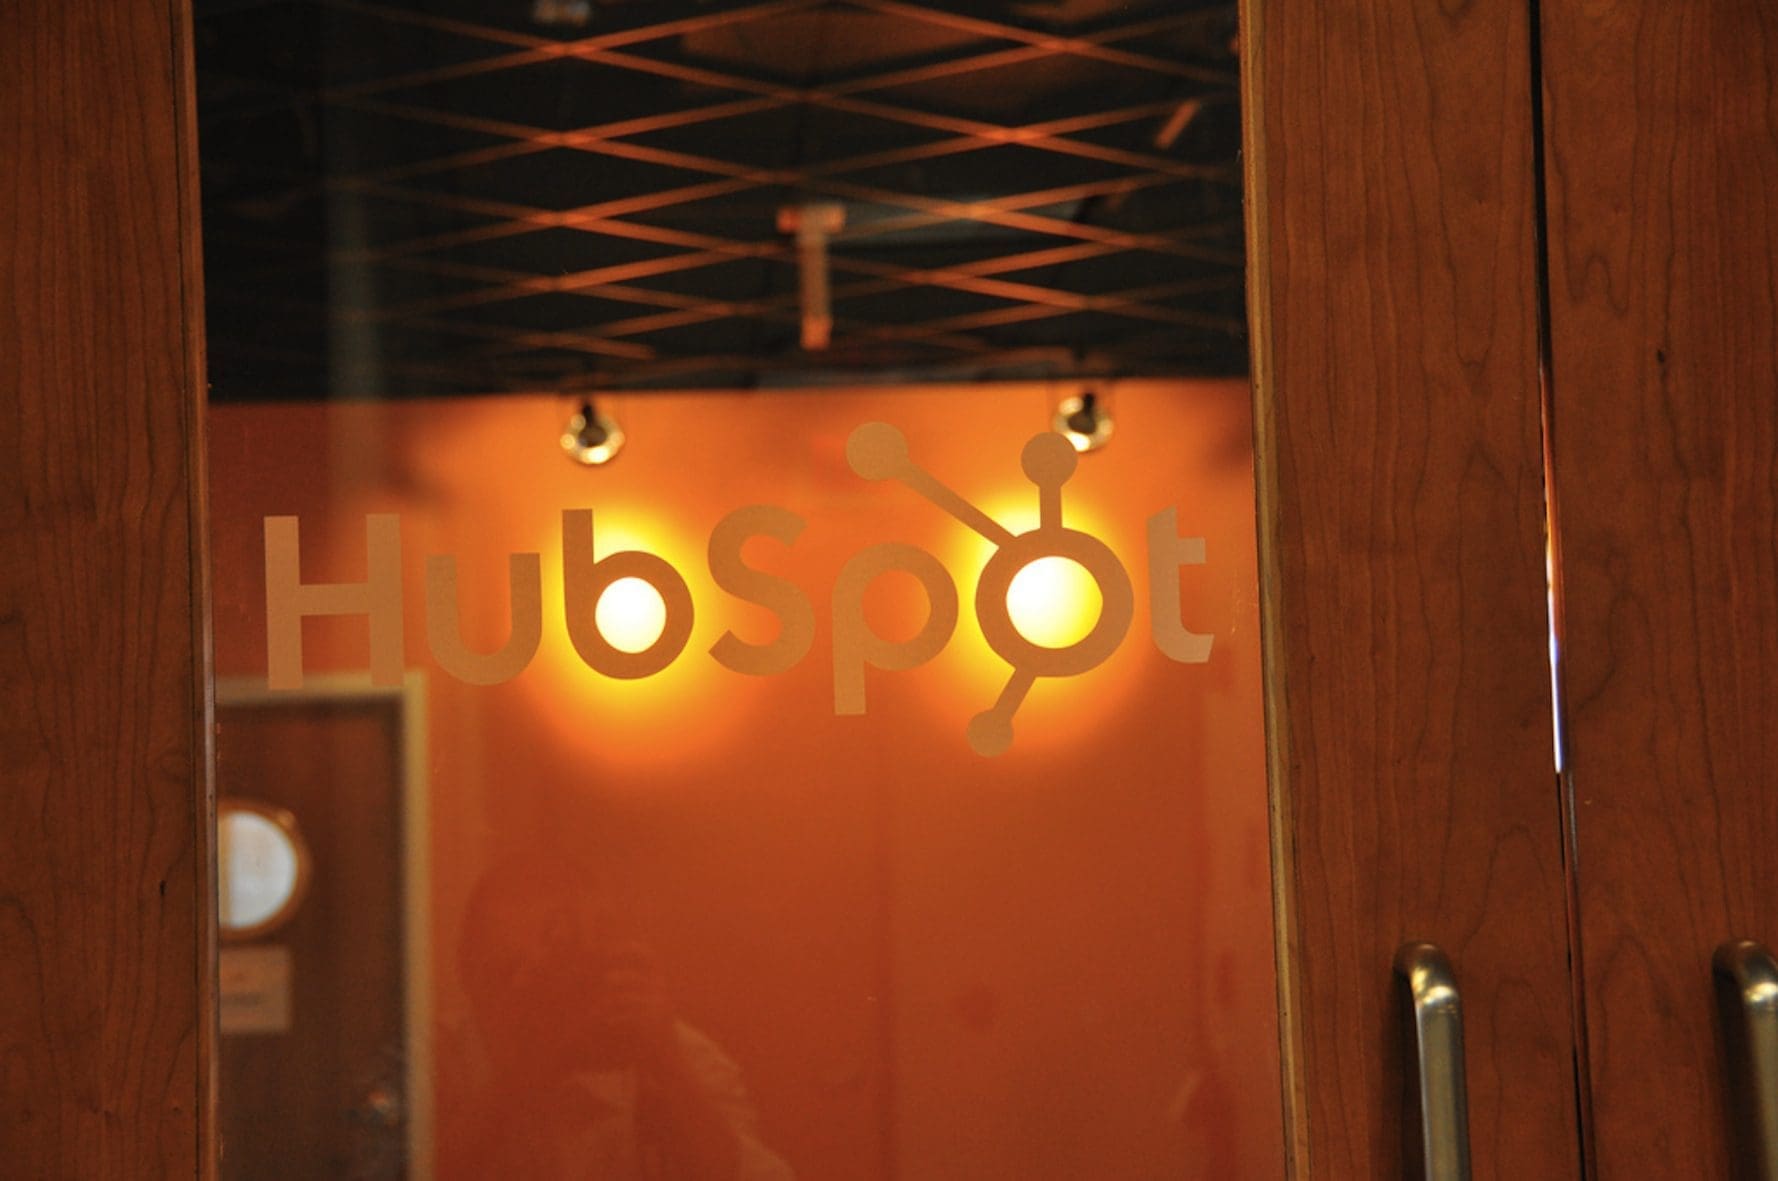 16 Ways to Save Money On HubSpot in 2020 – Secret Discounts, Savings, and Freebies